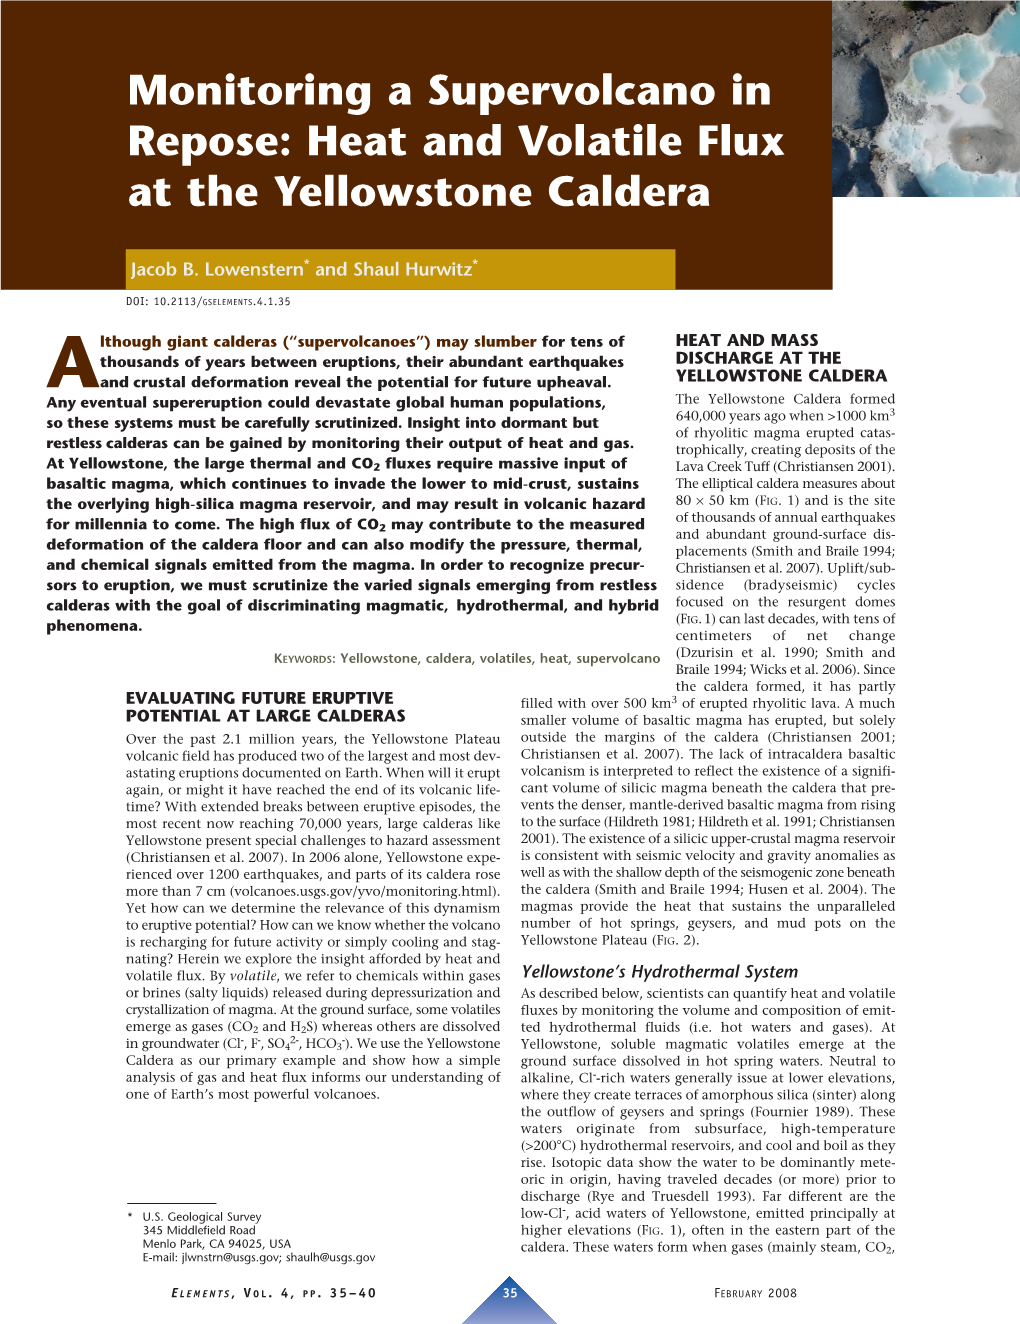 Heat and Volatile Flux at the Yellowstone Caldera